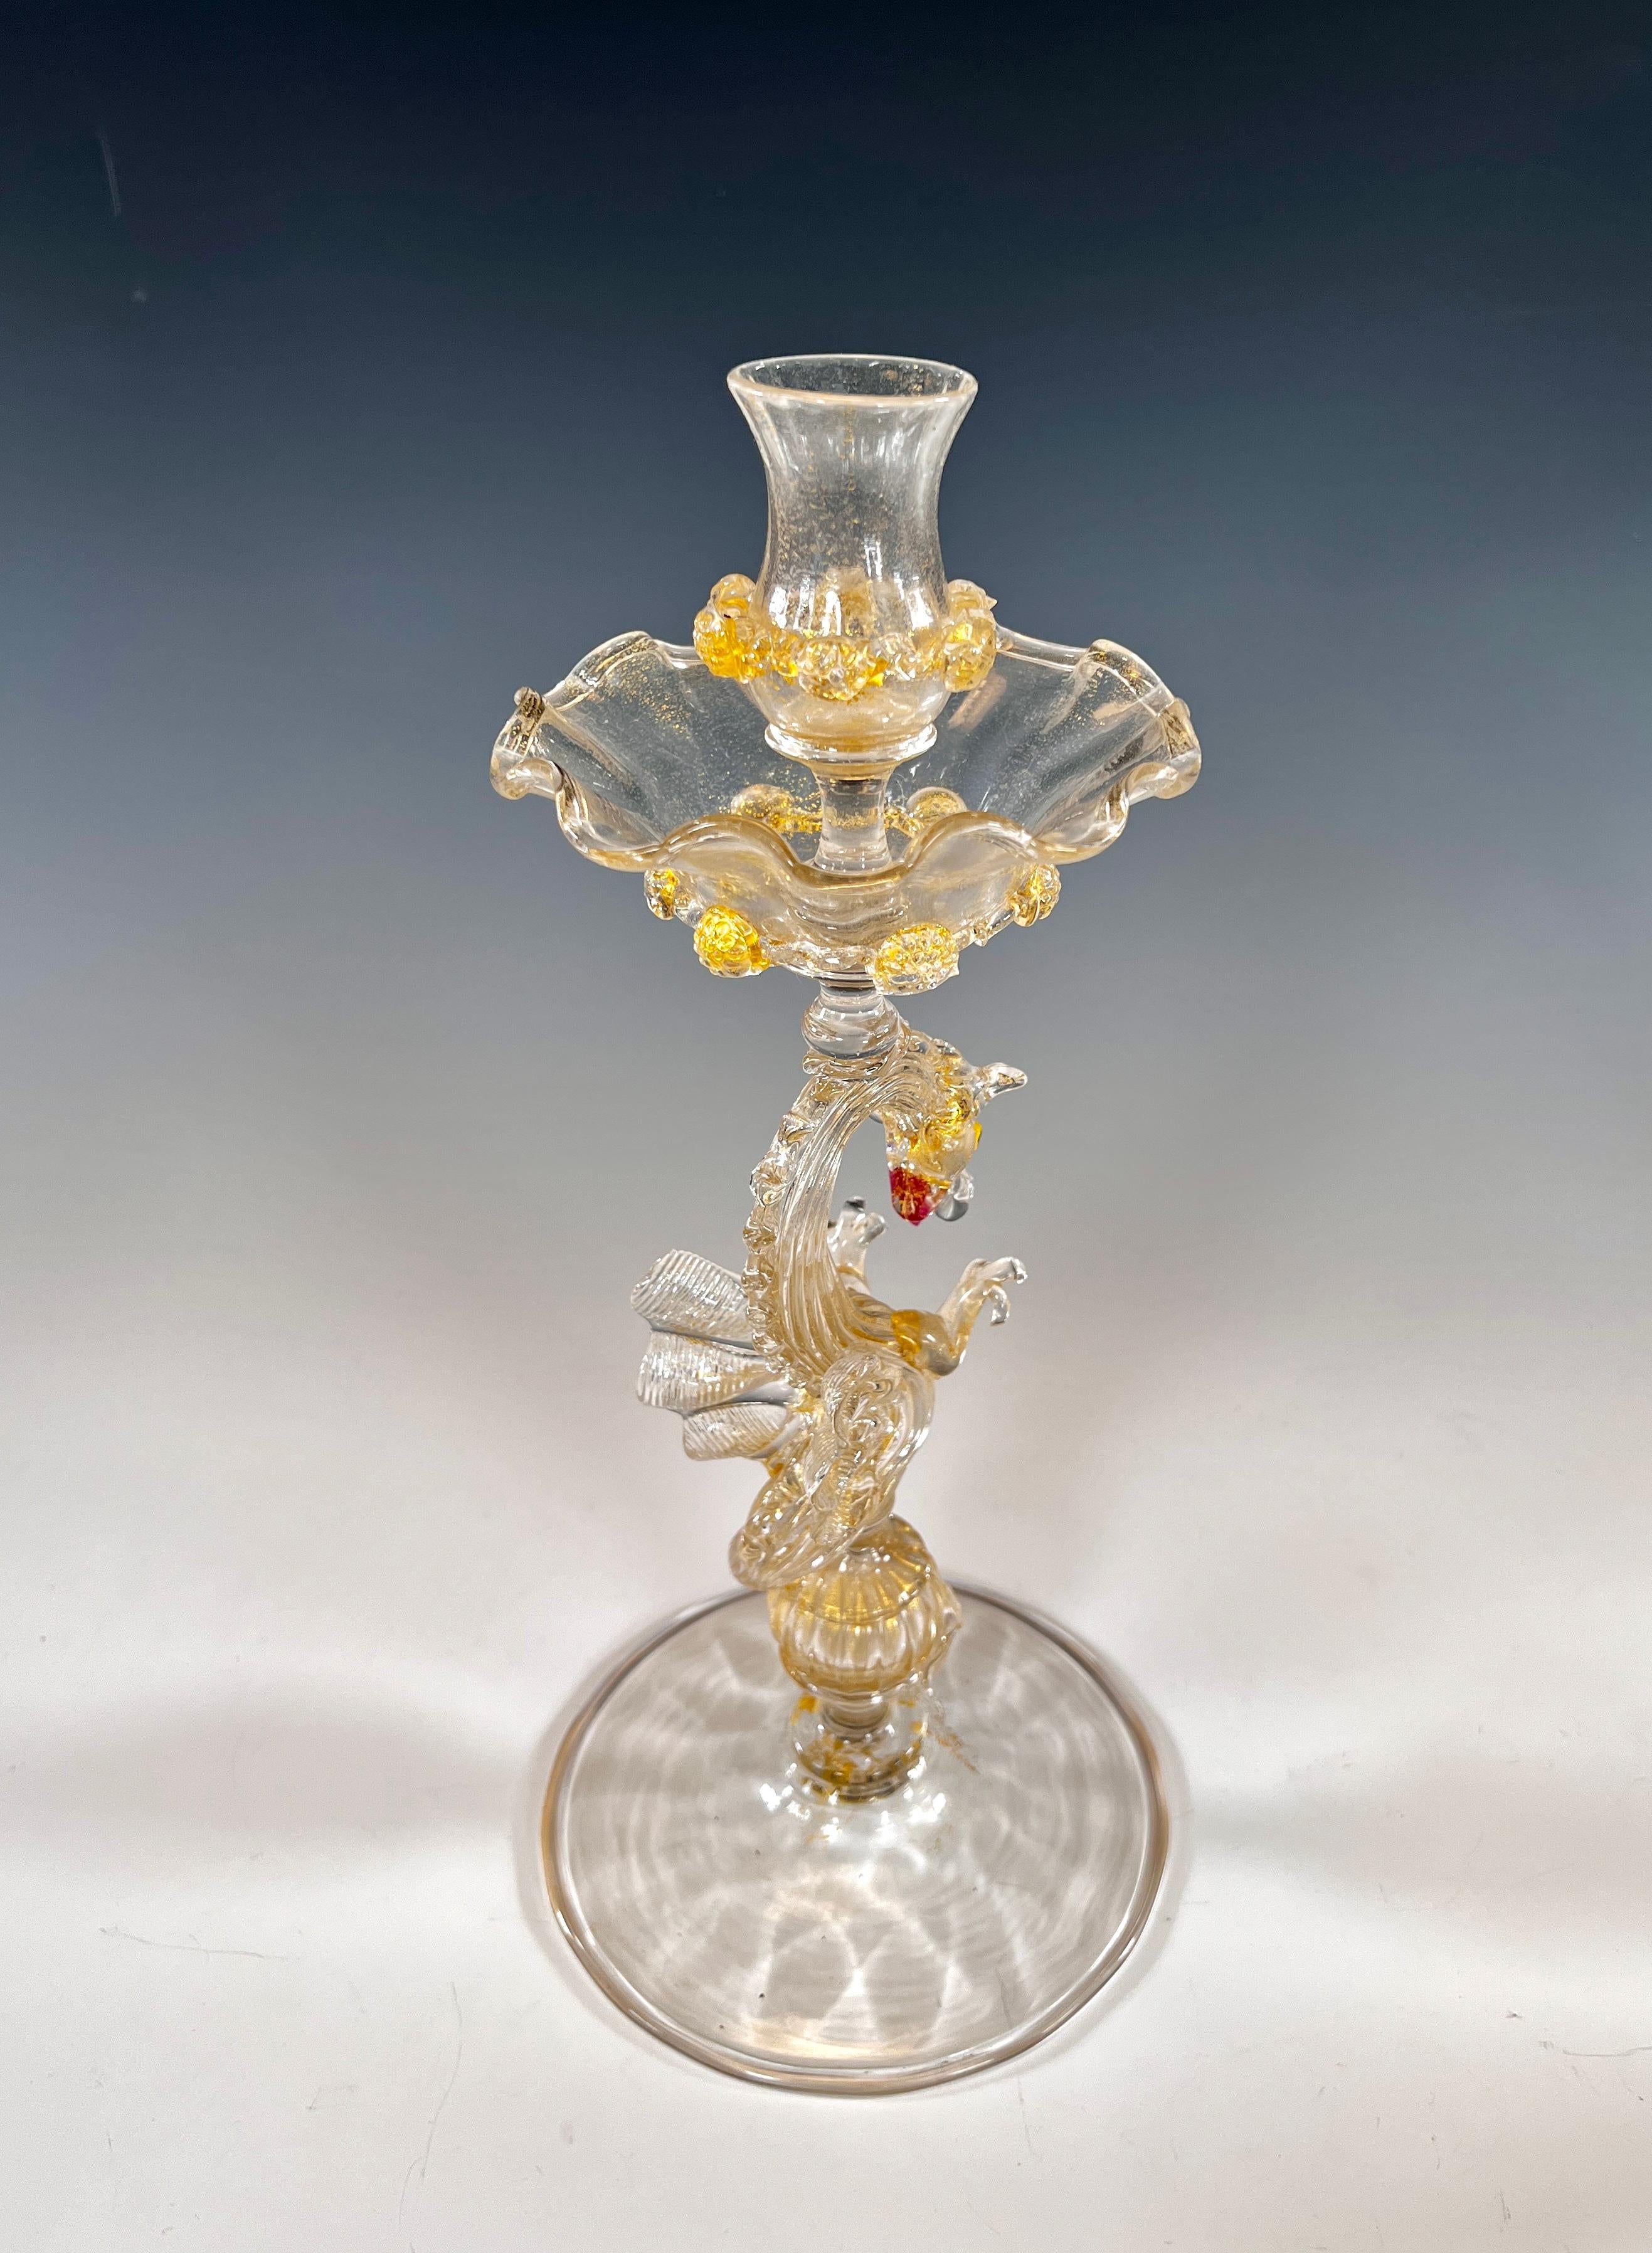 Dragon themed Venetian glass is one of the most sought after and rarest form of decoration and this pair of candlesticks exemplify that subject. Standing 9 1/2